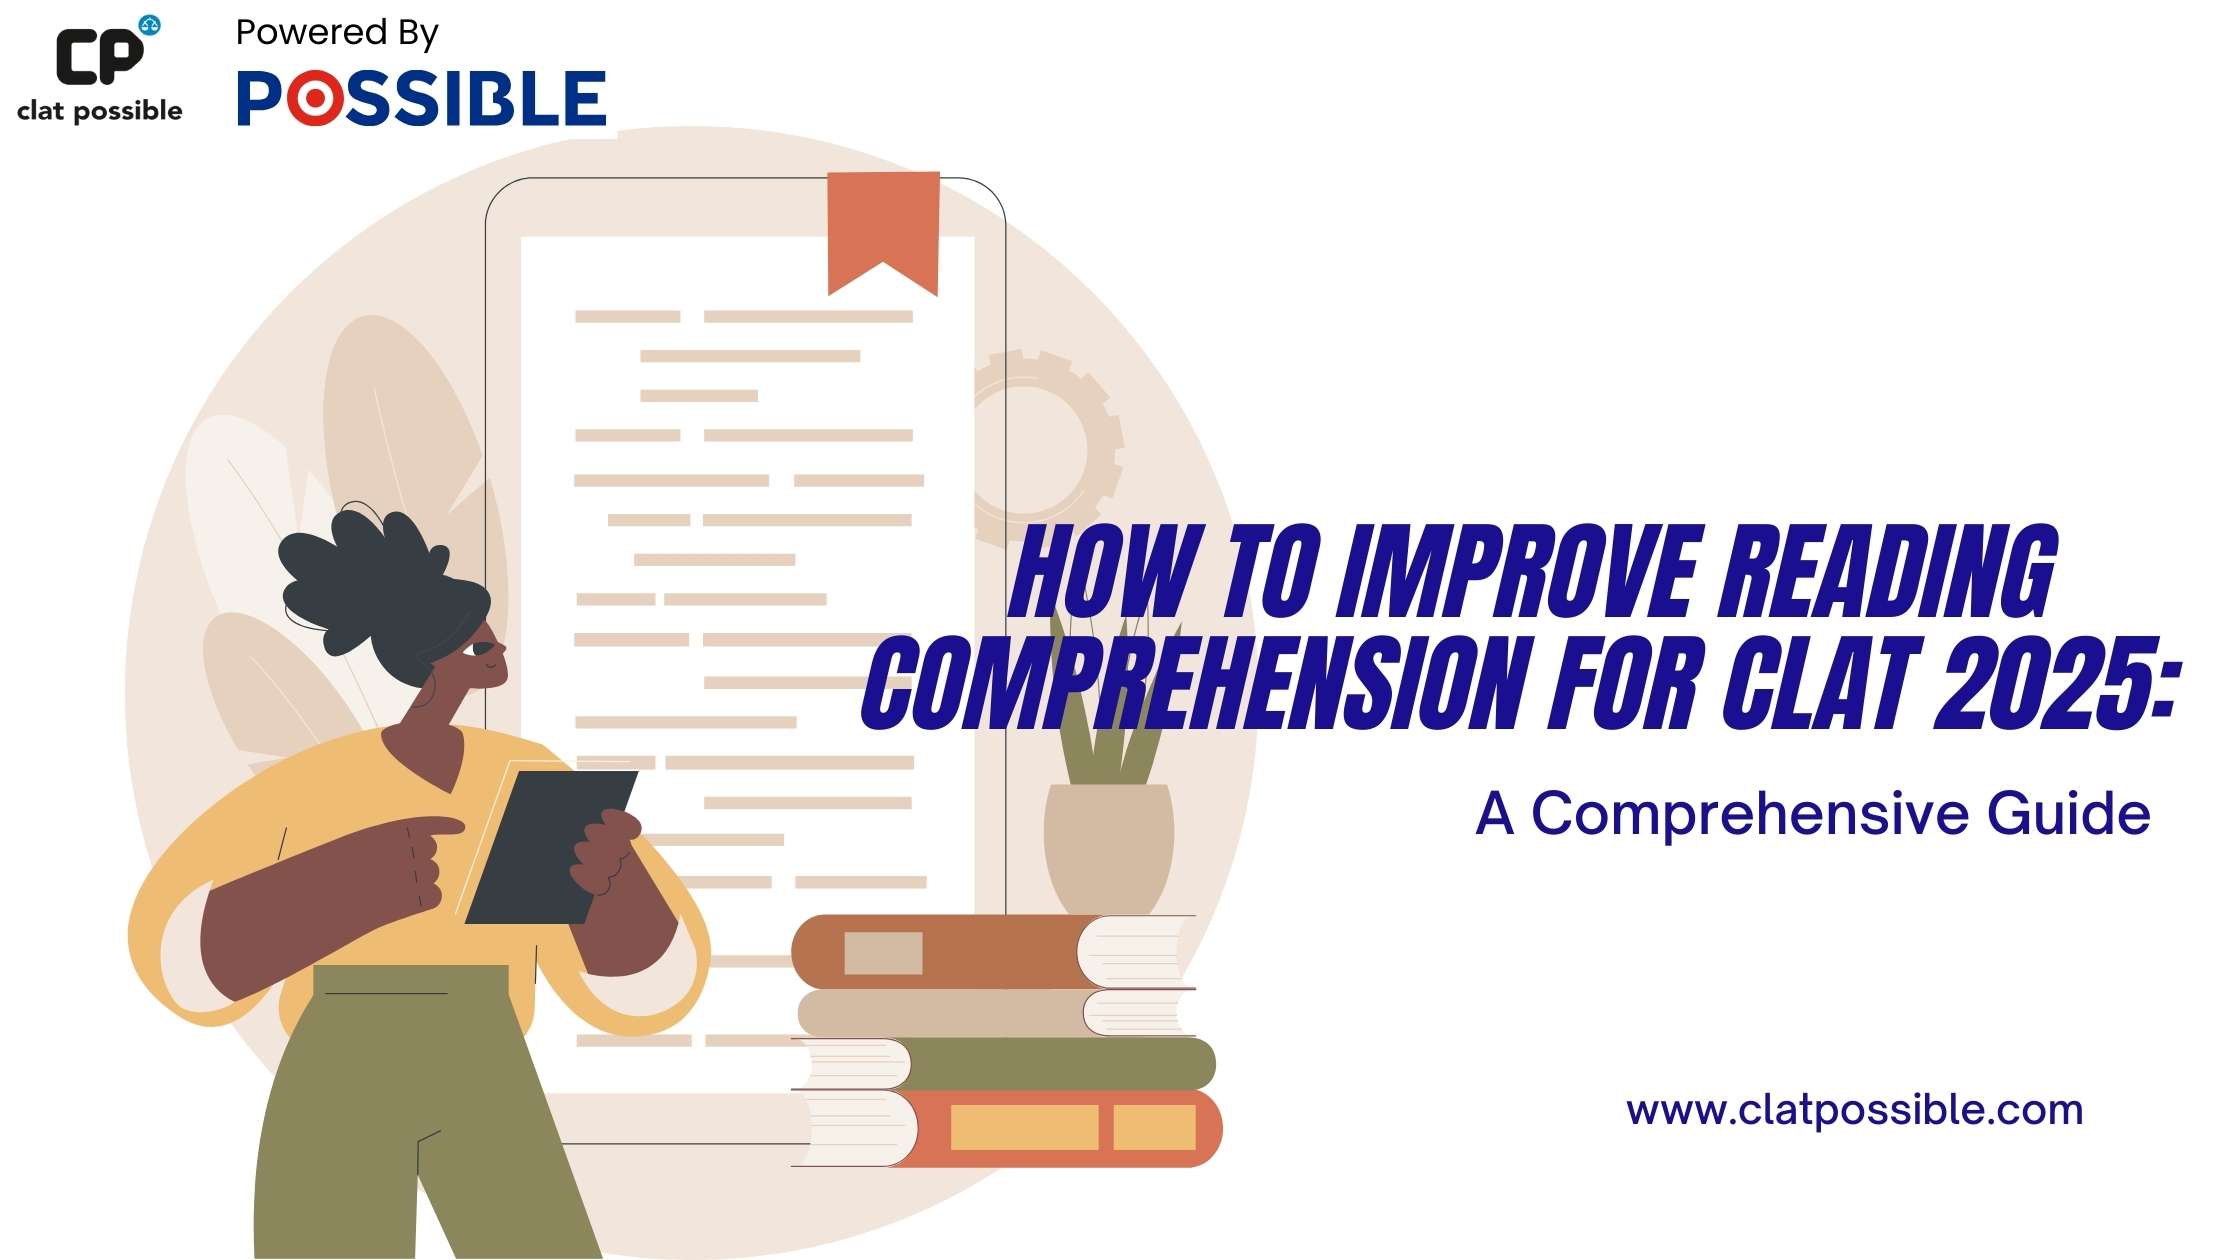 Improve Reading Comprehension for CLAT 2025